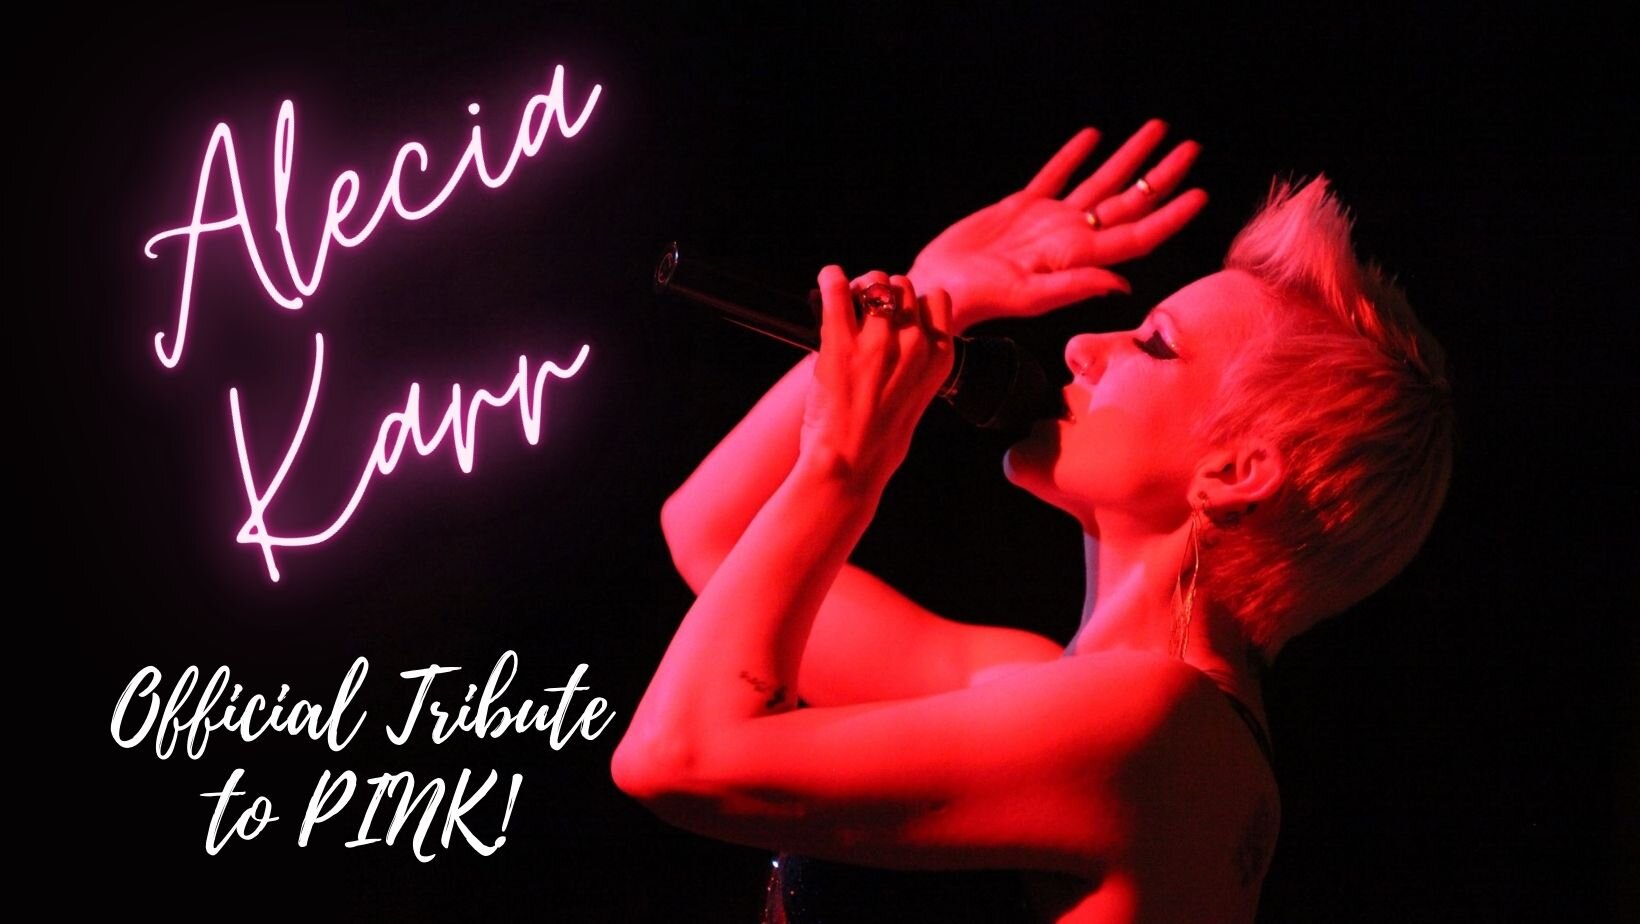 Alecia Karr the official tribute to Pink | Perth Ex-Service Club